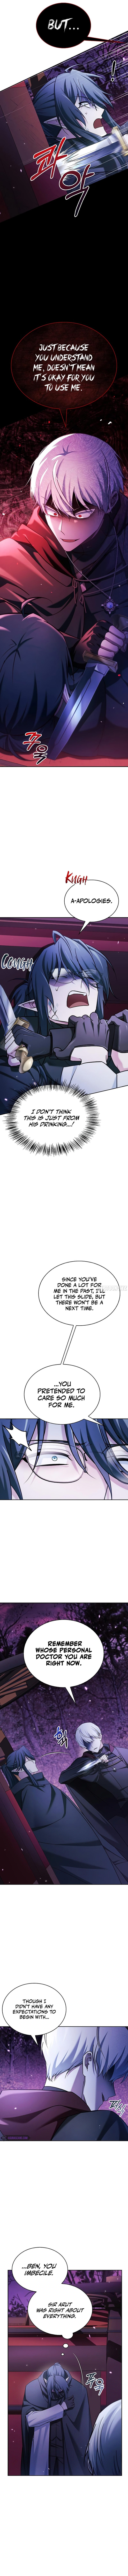 im-not-that-kind-of-talent-chap-42-7